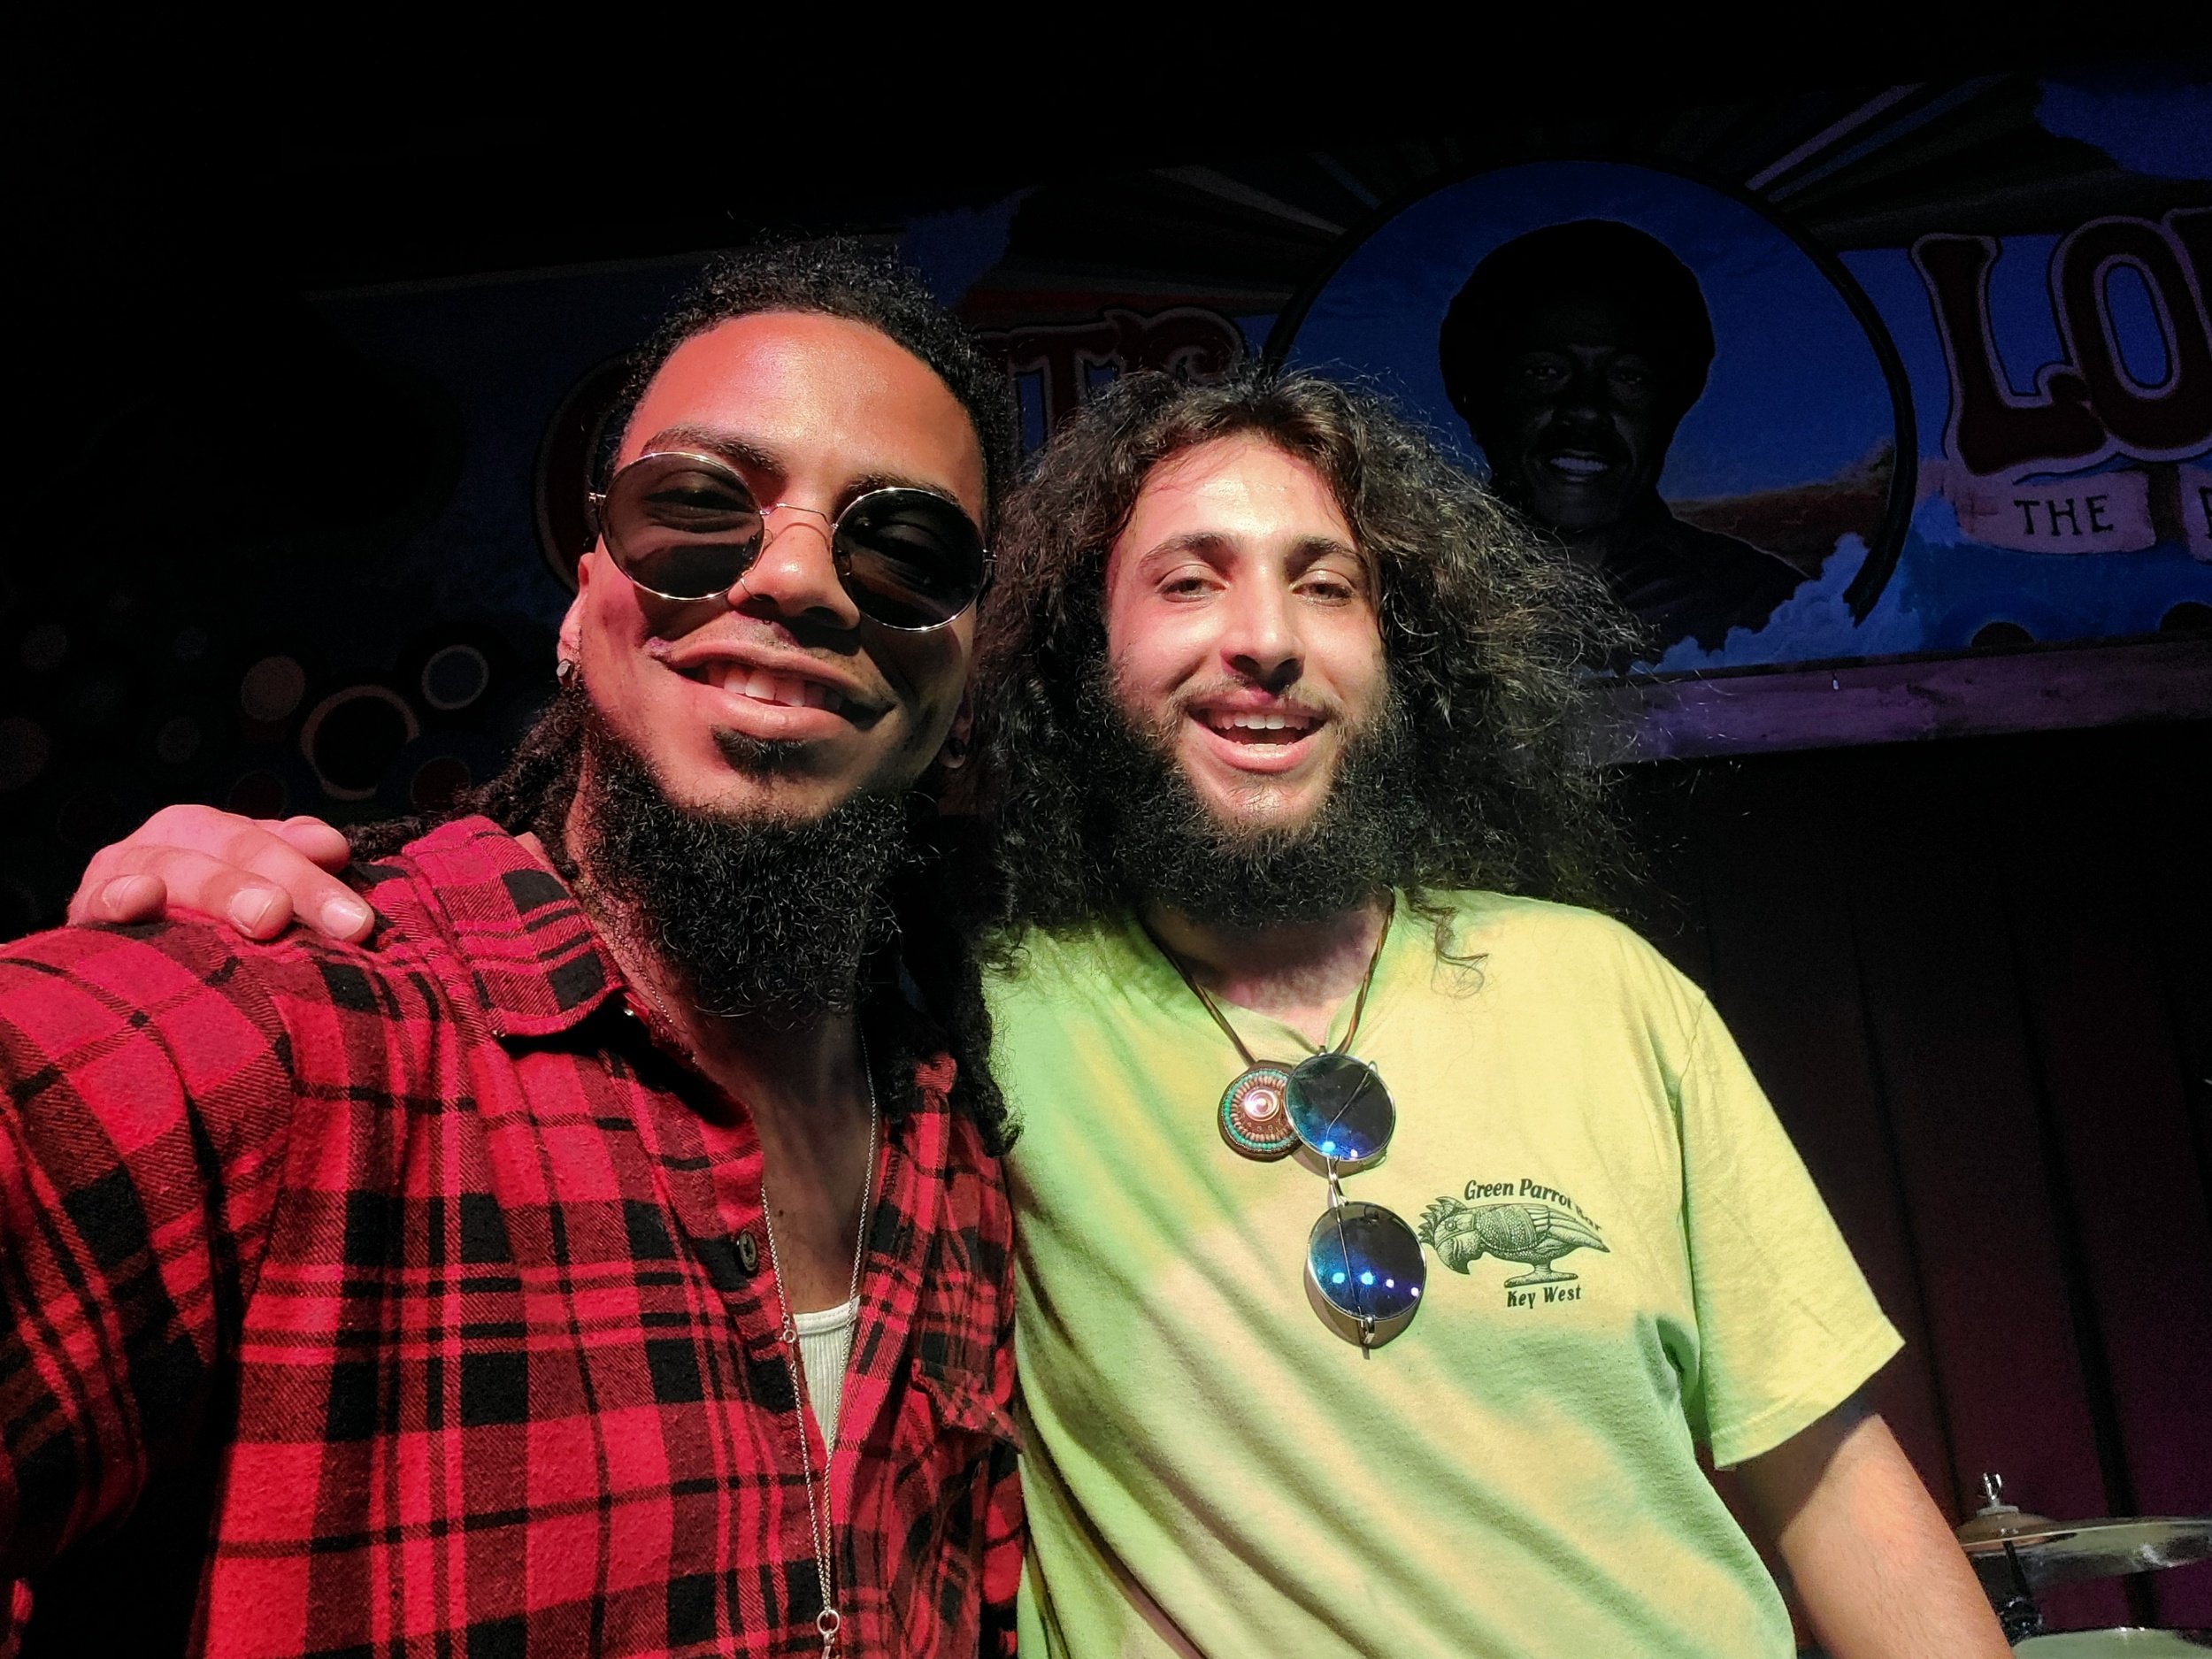  Angel Ocasio, Jr. &amp; Danny Chiraco of The Good Tree River Band 